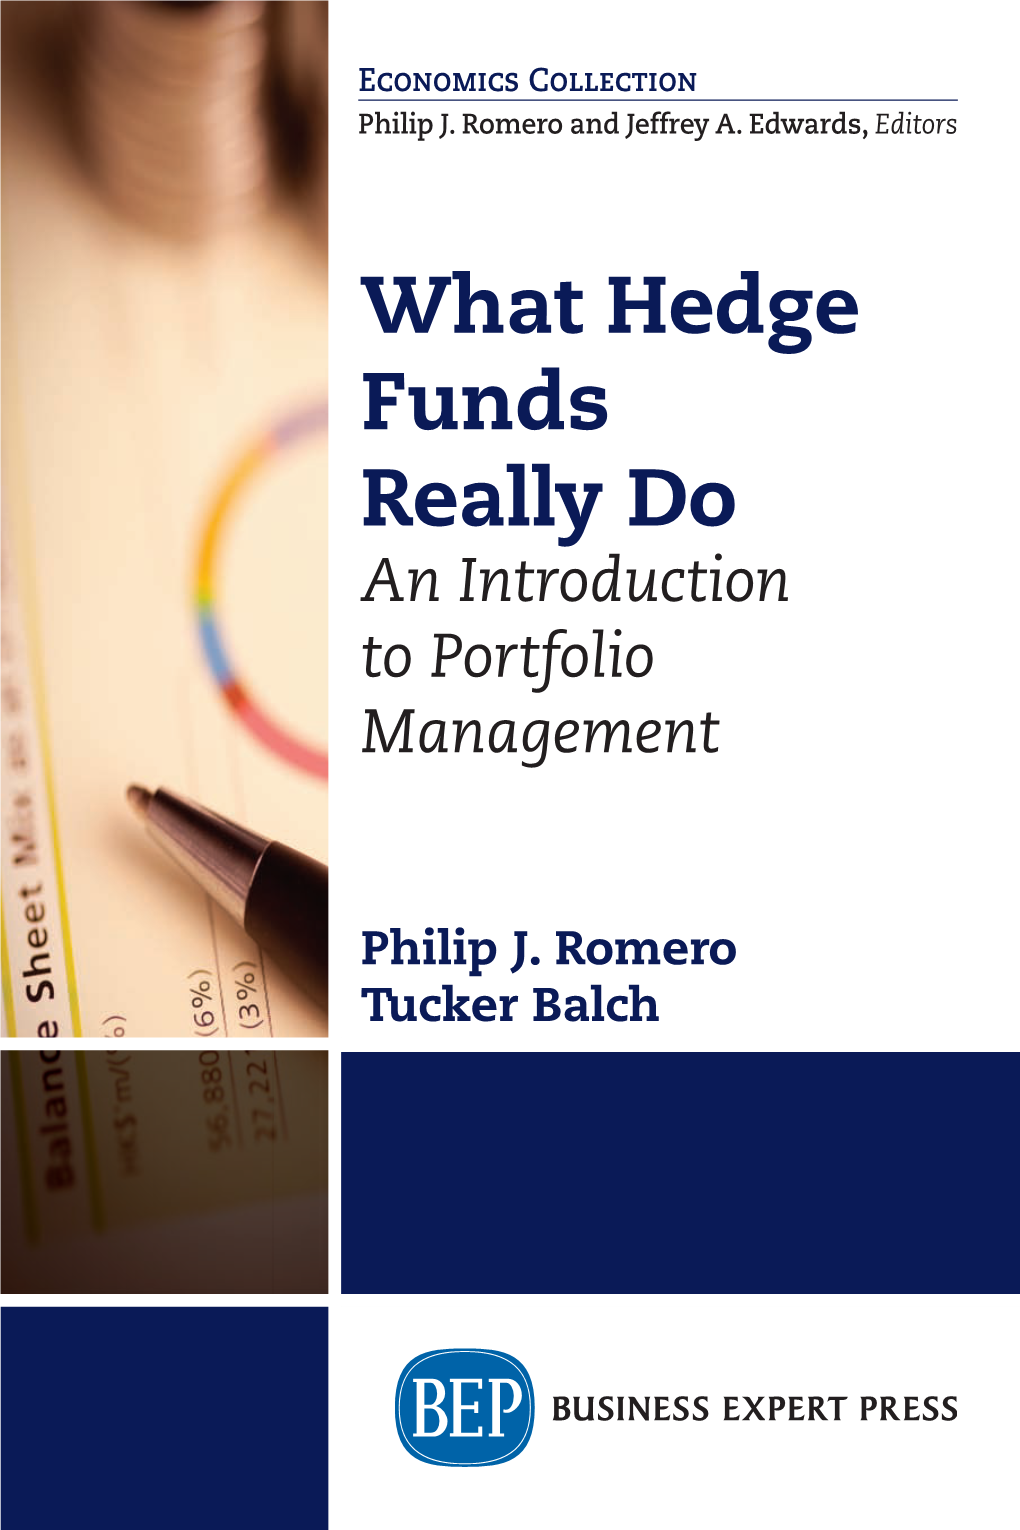 What Hedge Funds Really Do: an Introduction to Portfolio Management Copyright © Business Expert Press, LLC, 2014